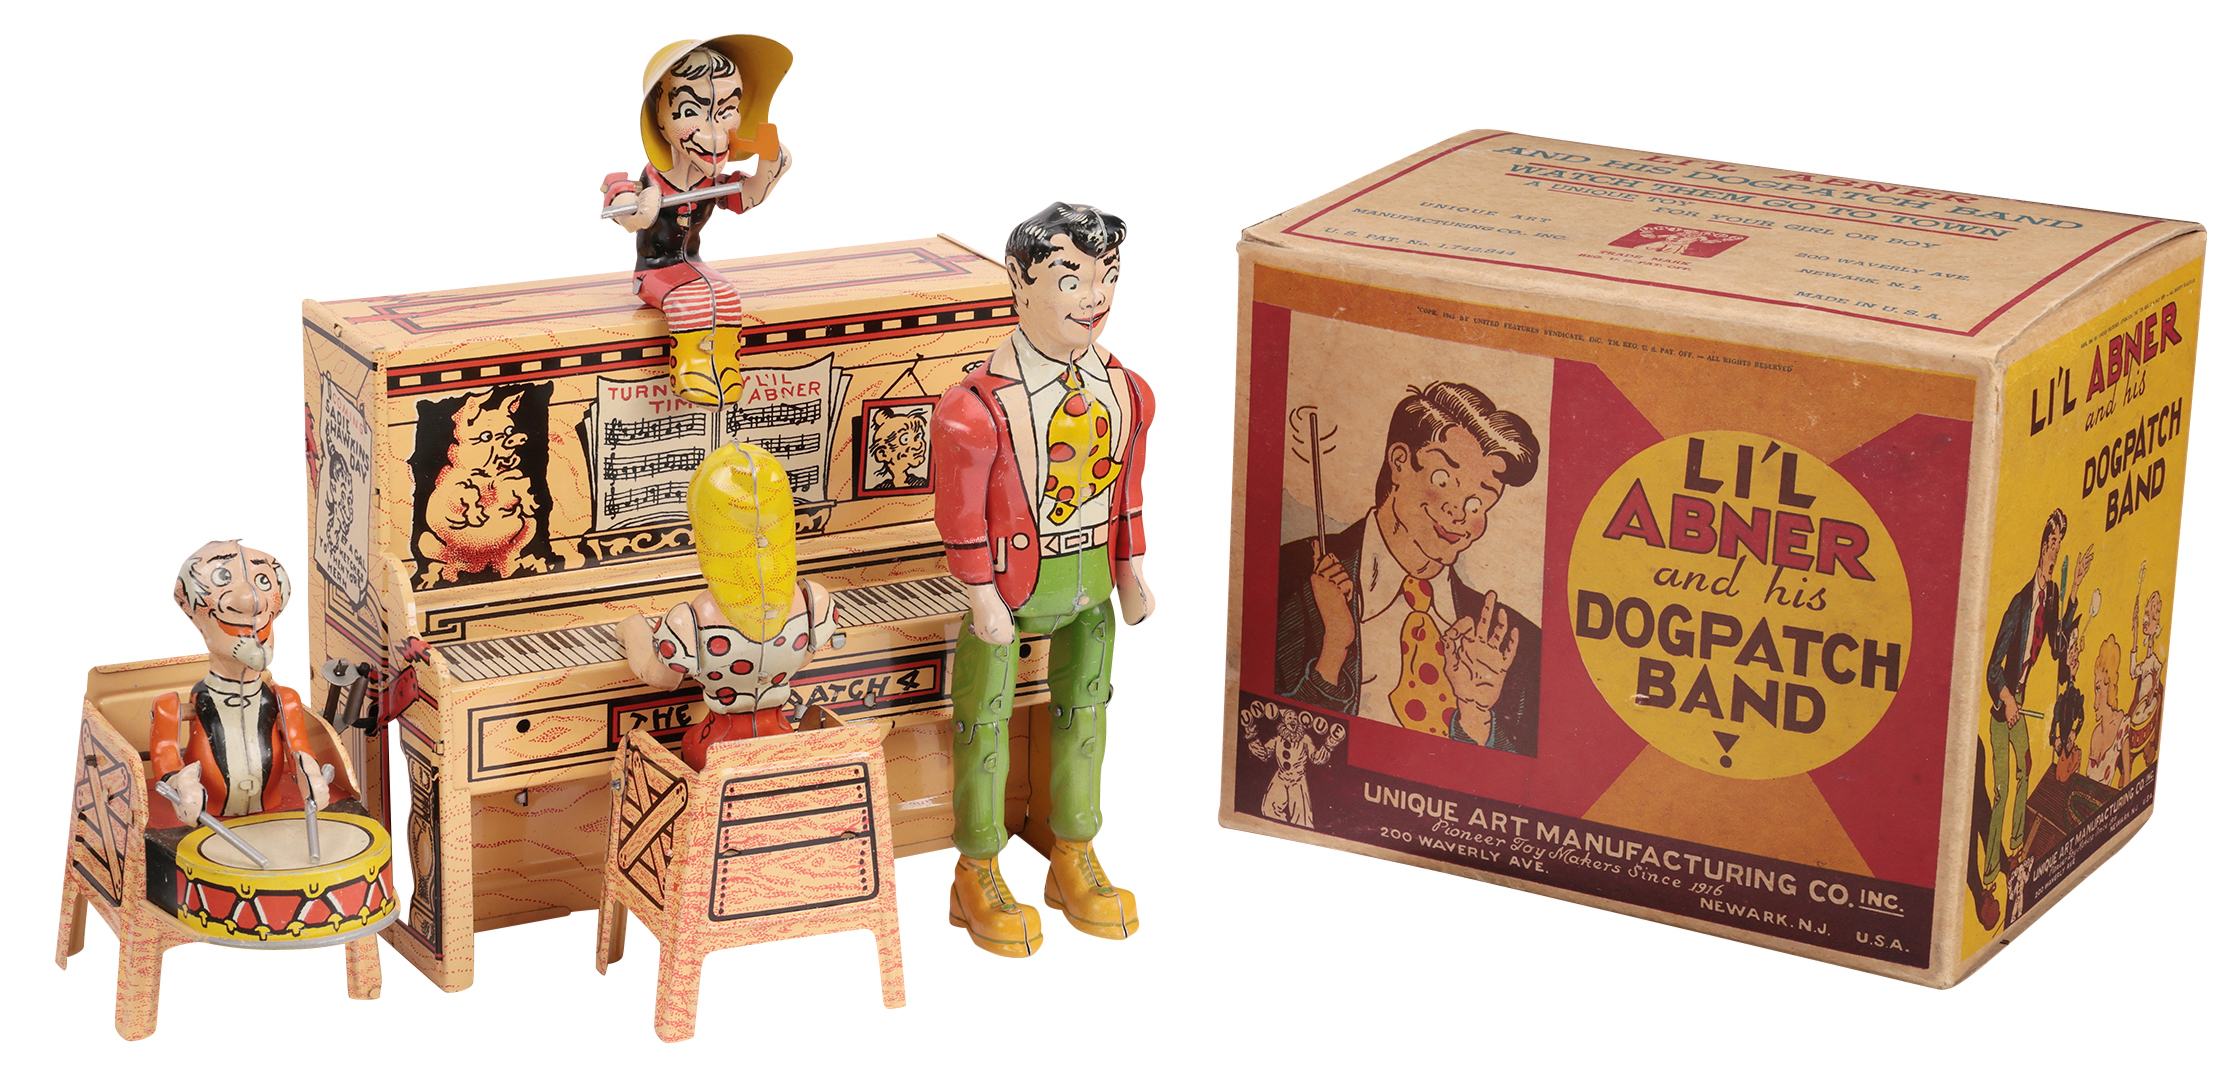 Li'l Abner Dogpatch Band Toy (In Box) | Antique Advertising LLC